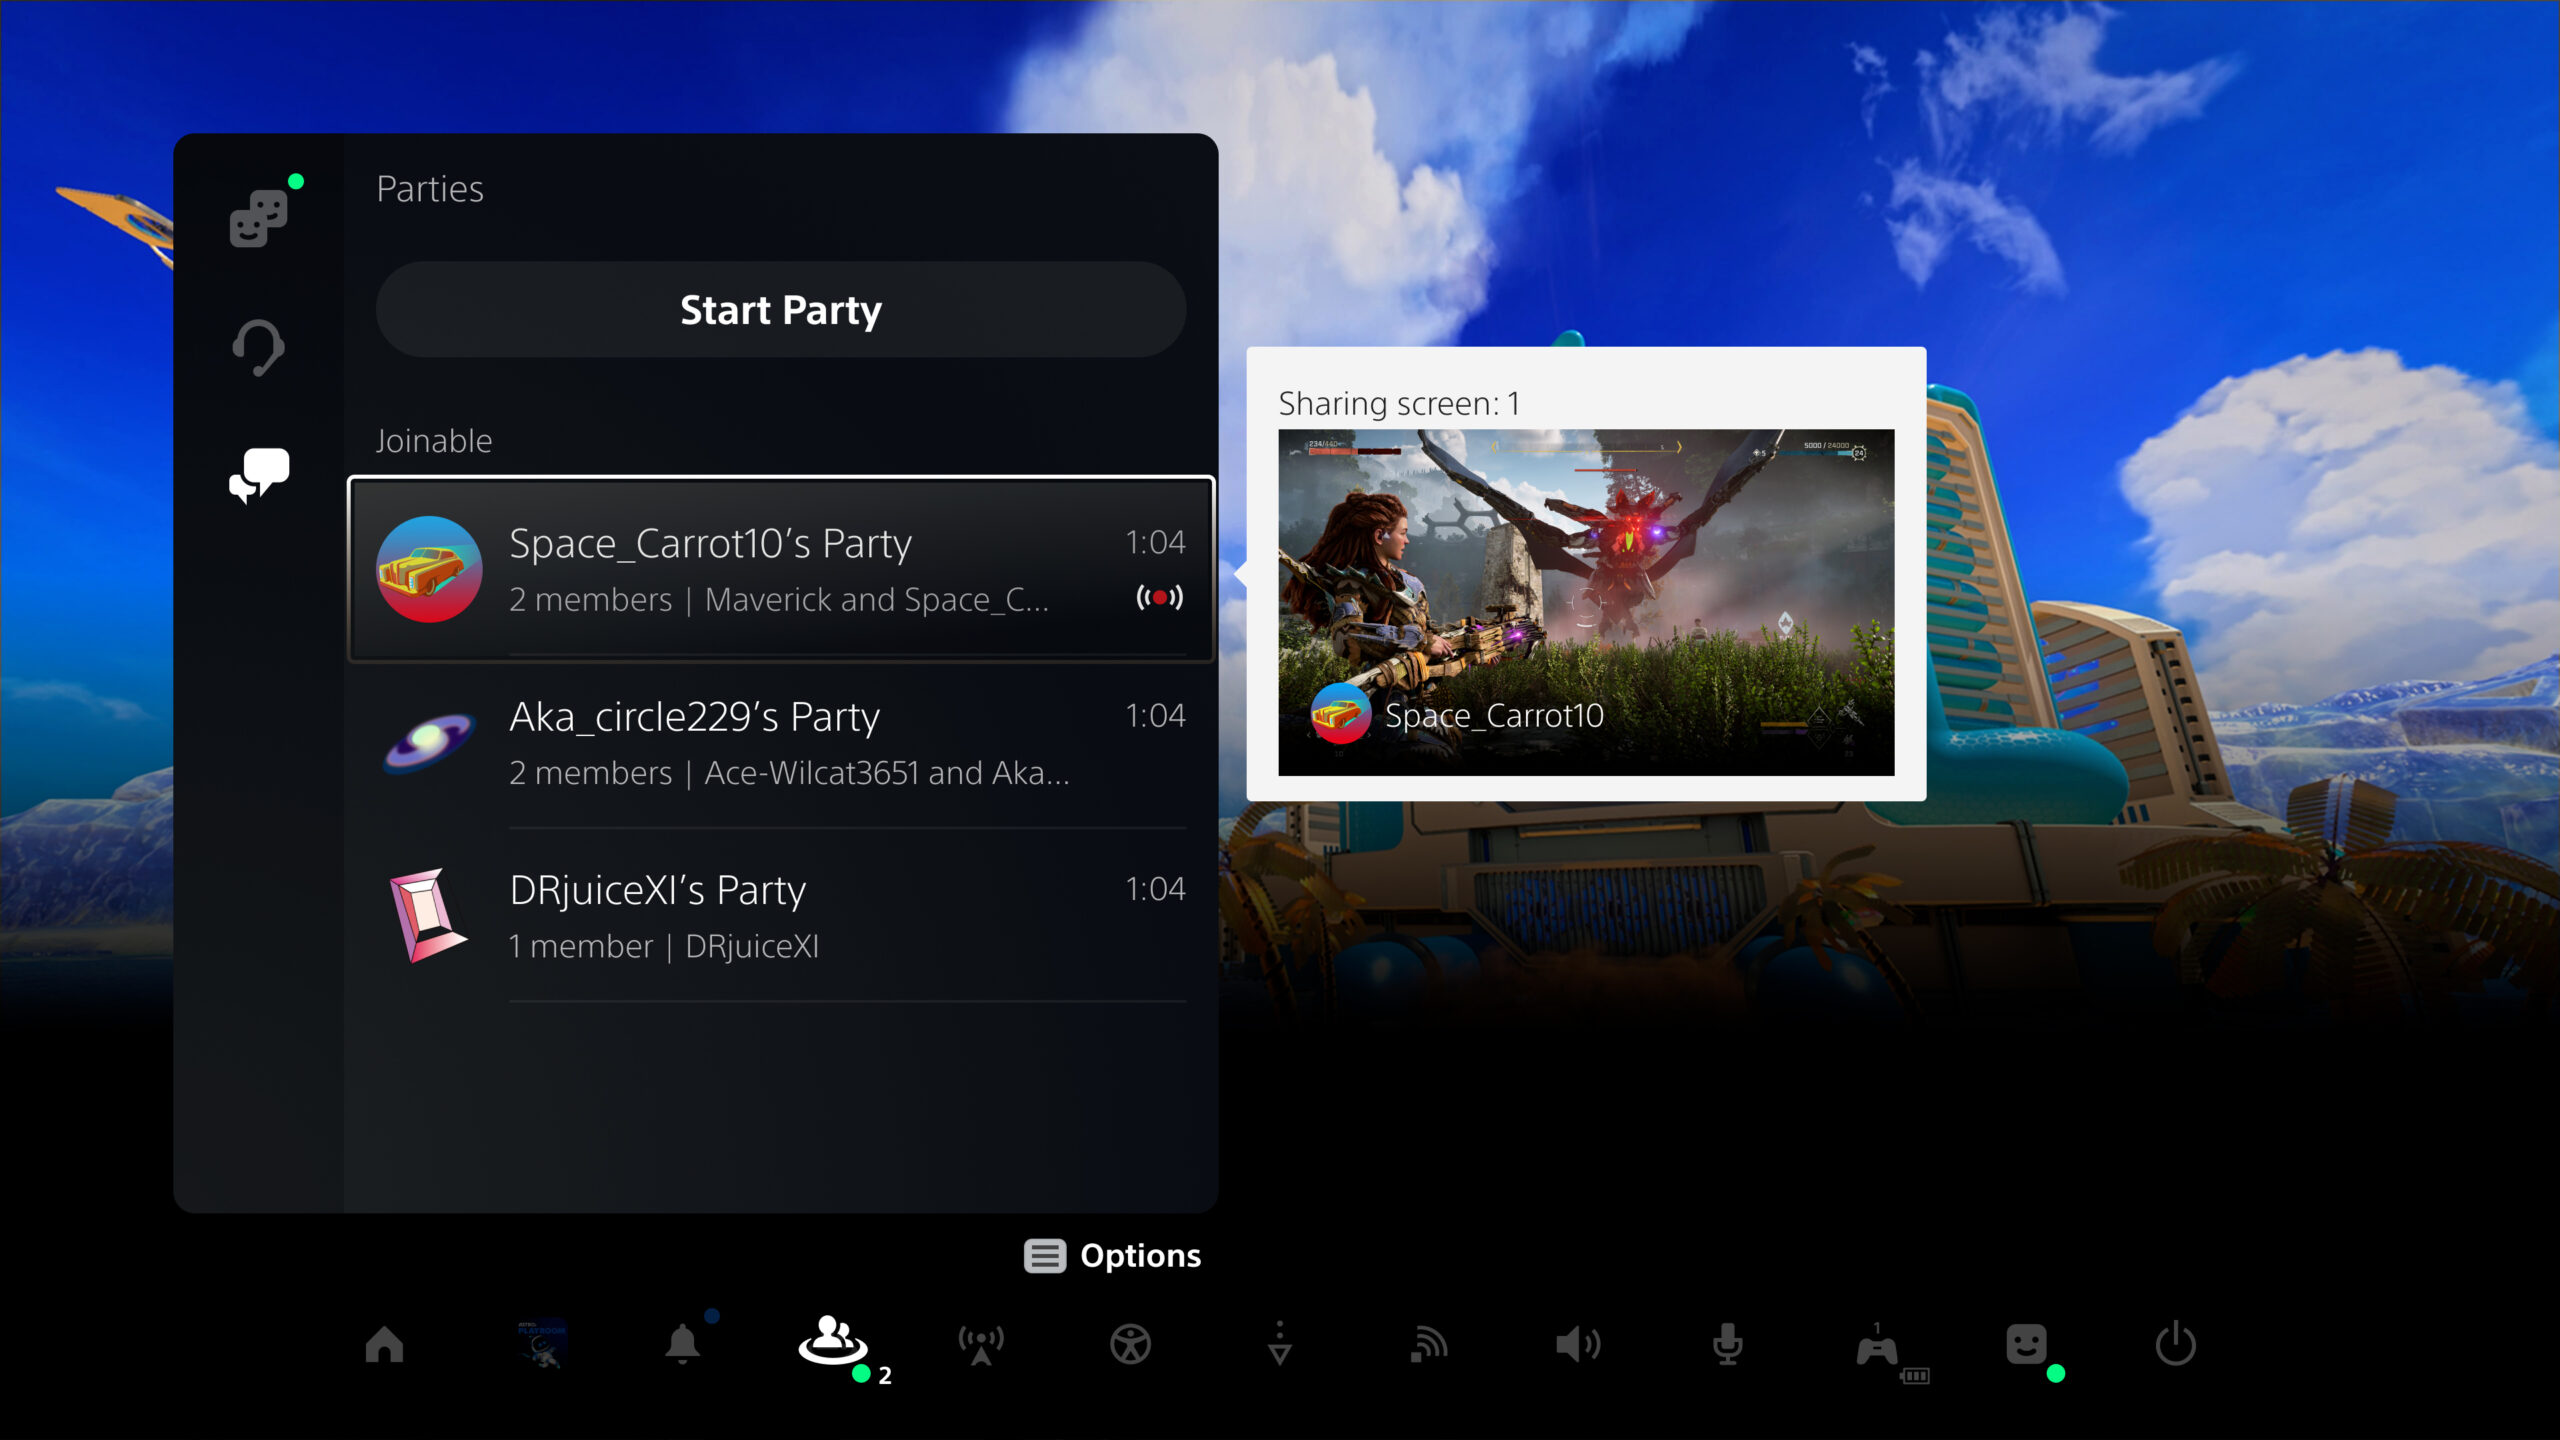  "PS5 UI screenshot showing a preview of Share Screen"